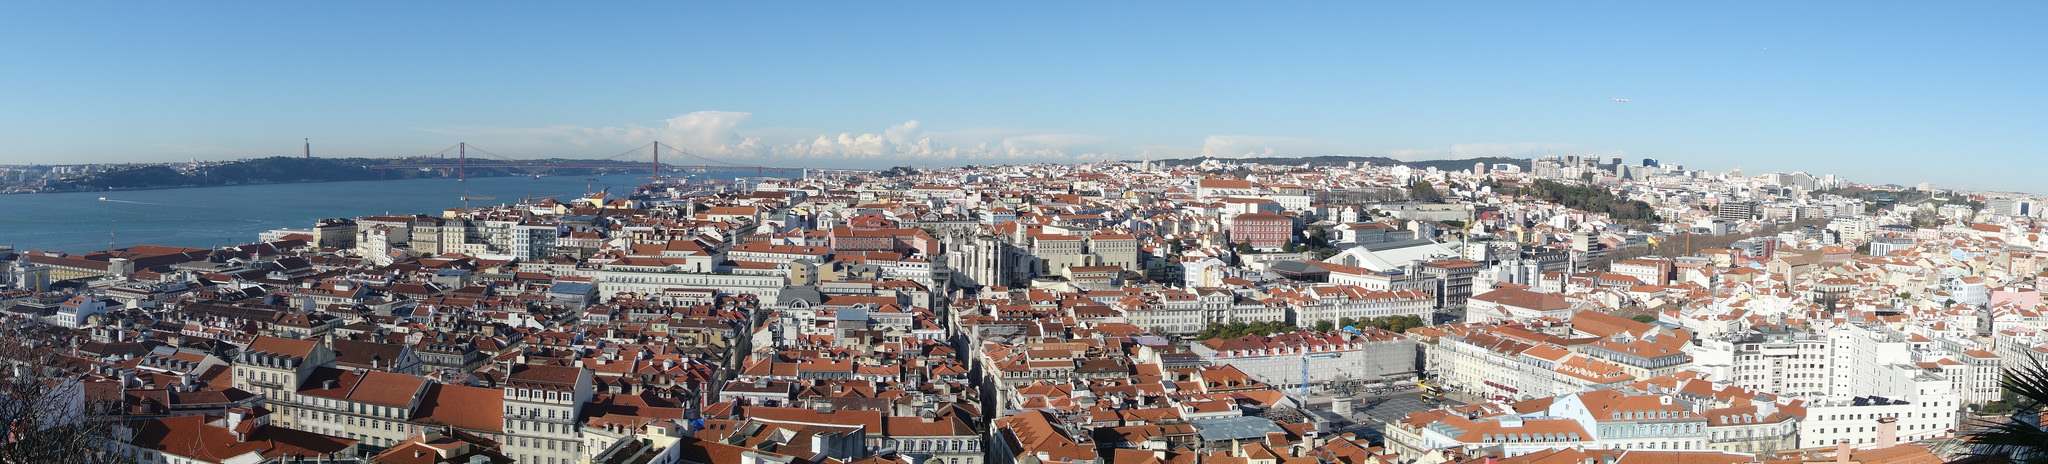 lisbon30 Top Tourist Attractions in Lisbon, Portugal